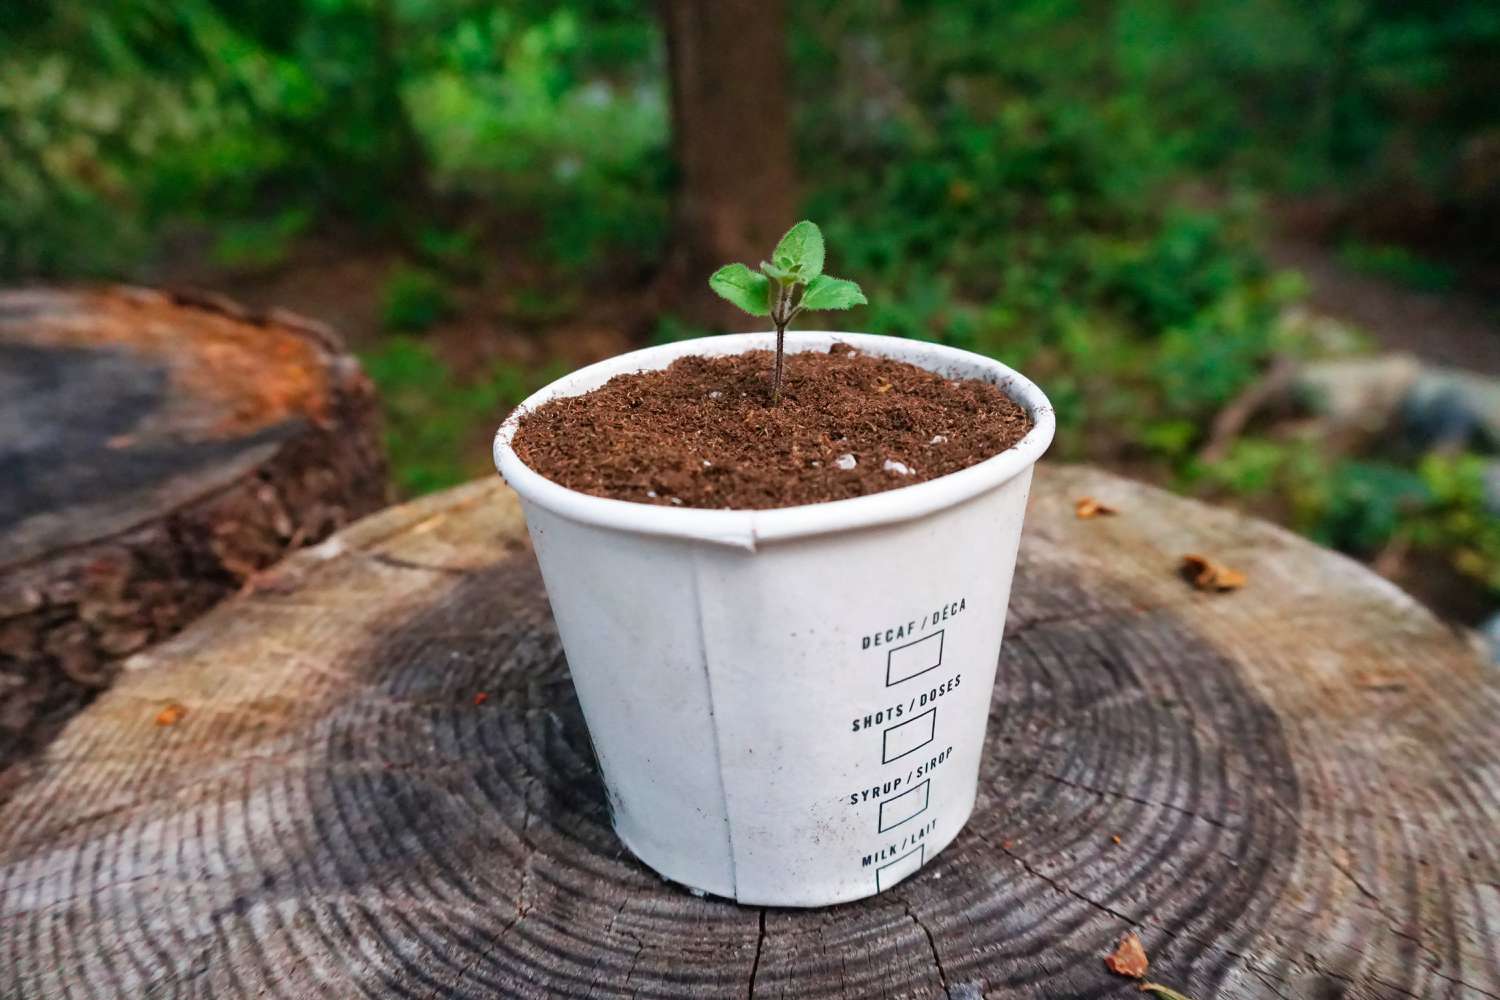 How To Plant Seeds In A Pot